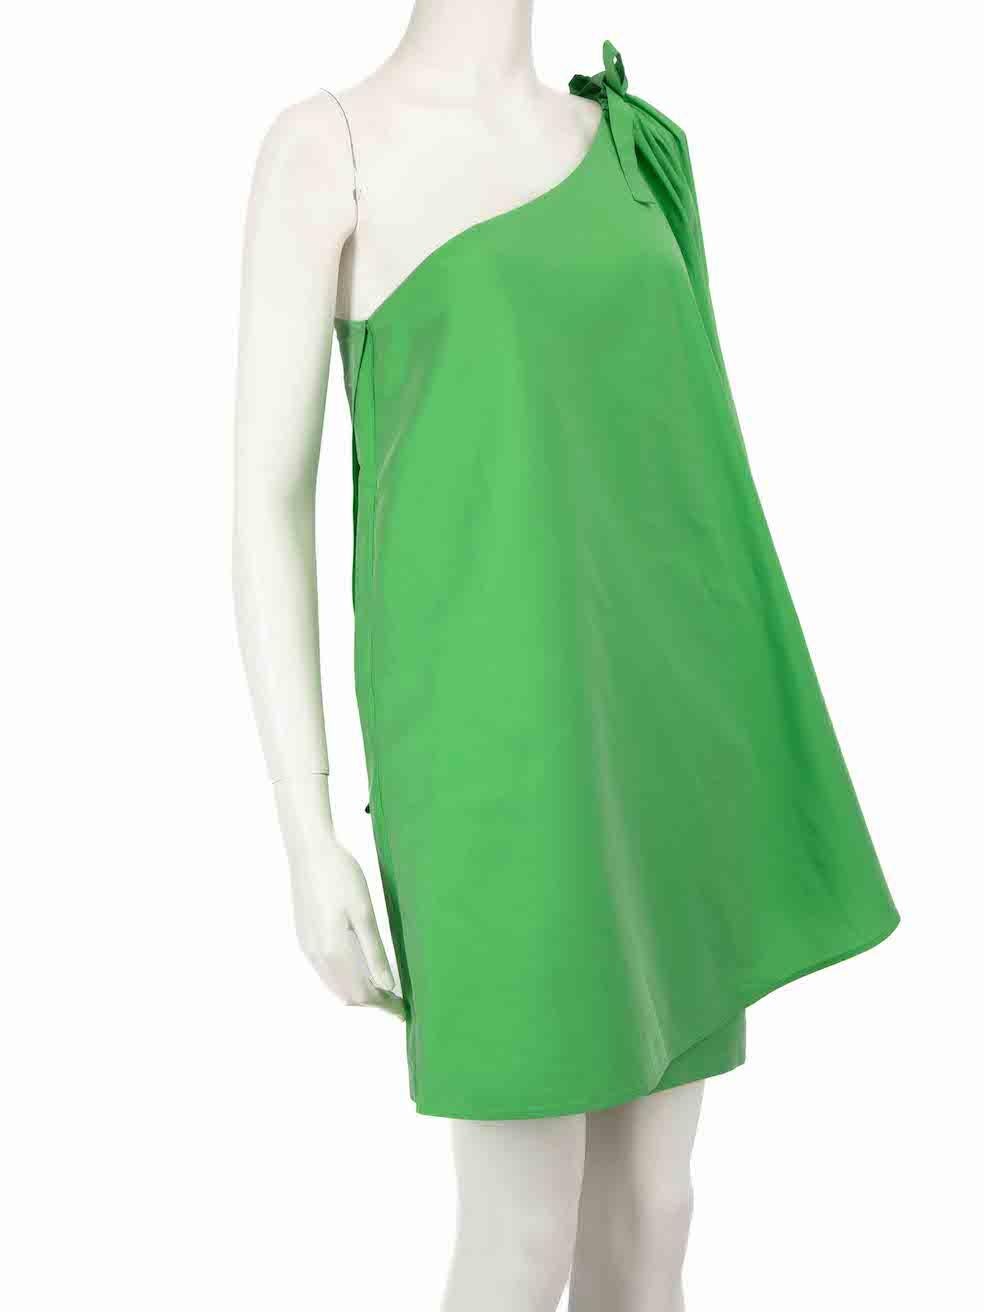 CONDITION is Never worn, with tags. No visible wear to dress is evident on this new Bernadette designer resale item.
 
 
 
 Details
 
 
 Green
 
 Polyester
 
 Mini dress
 
 One shoulder
 
 Tie strap on shoulder
 
 
 
 
 
 Made in Romania
 
 
 
